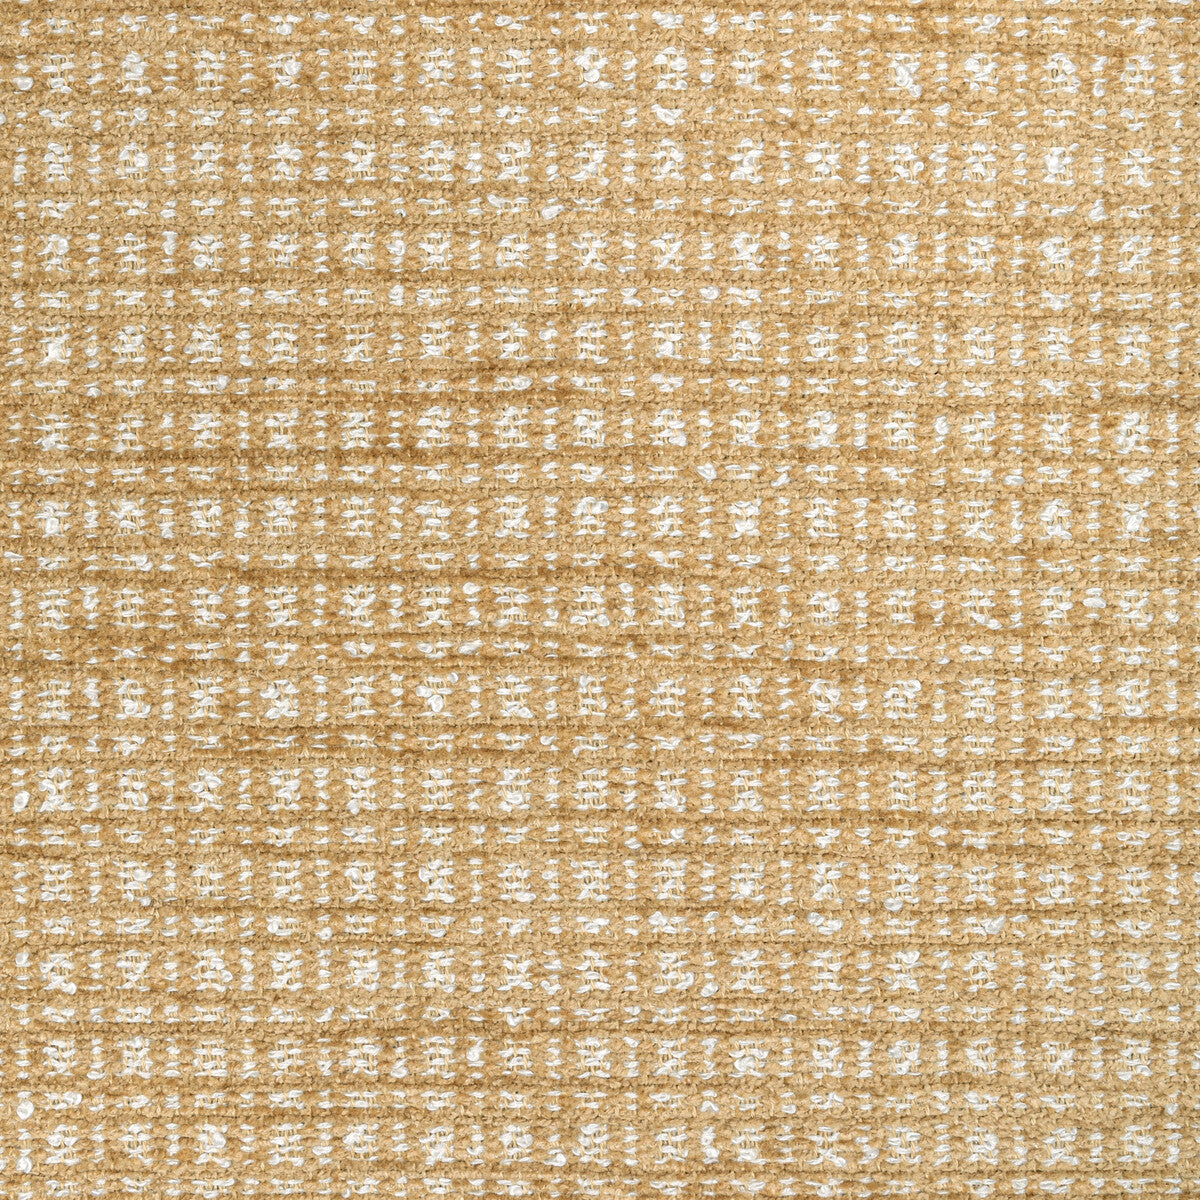 Landiers Texture fabric in gold color - pattern 8022123.4.0 - by Brunschwig &amp; Fils in the Chambery Textures III collection